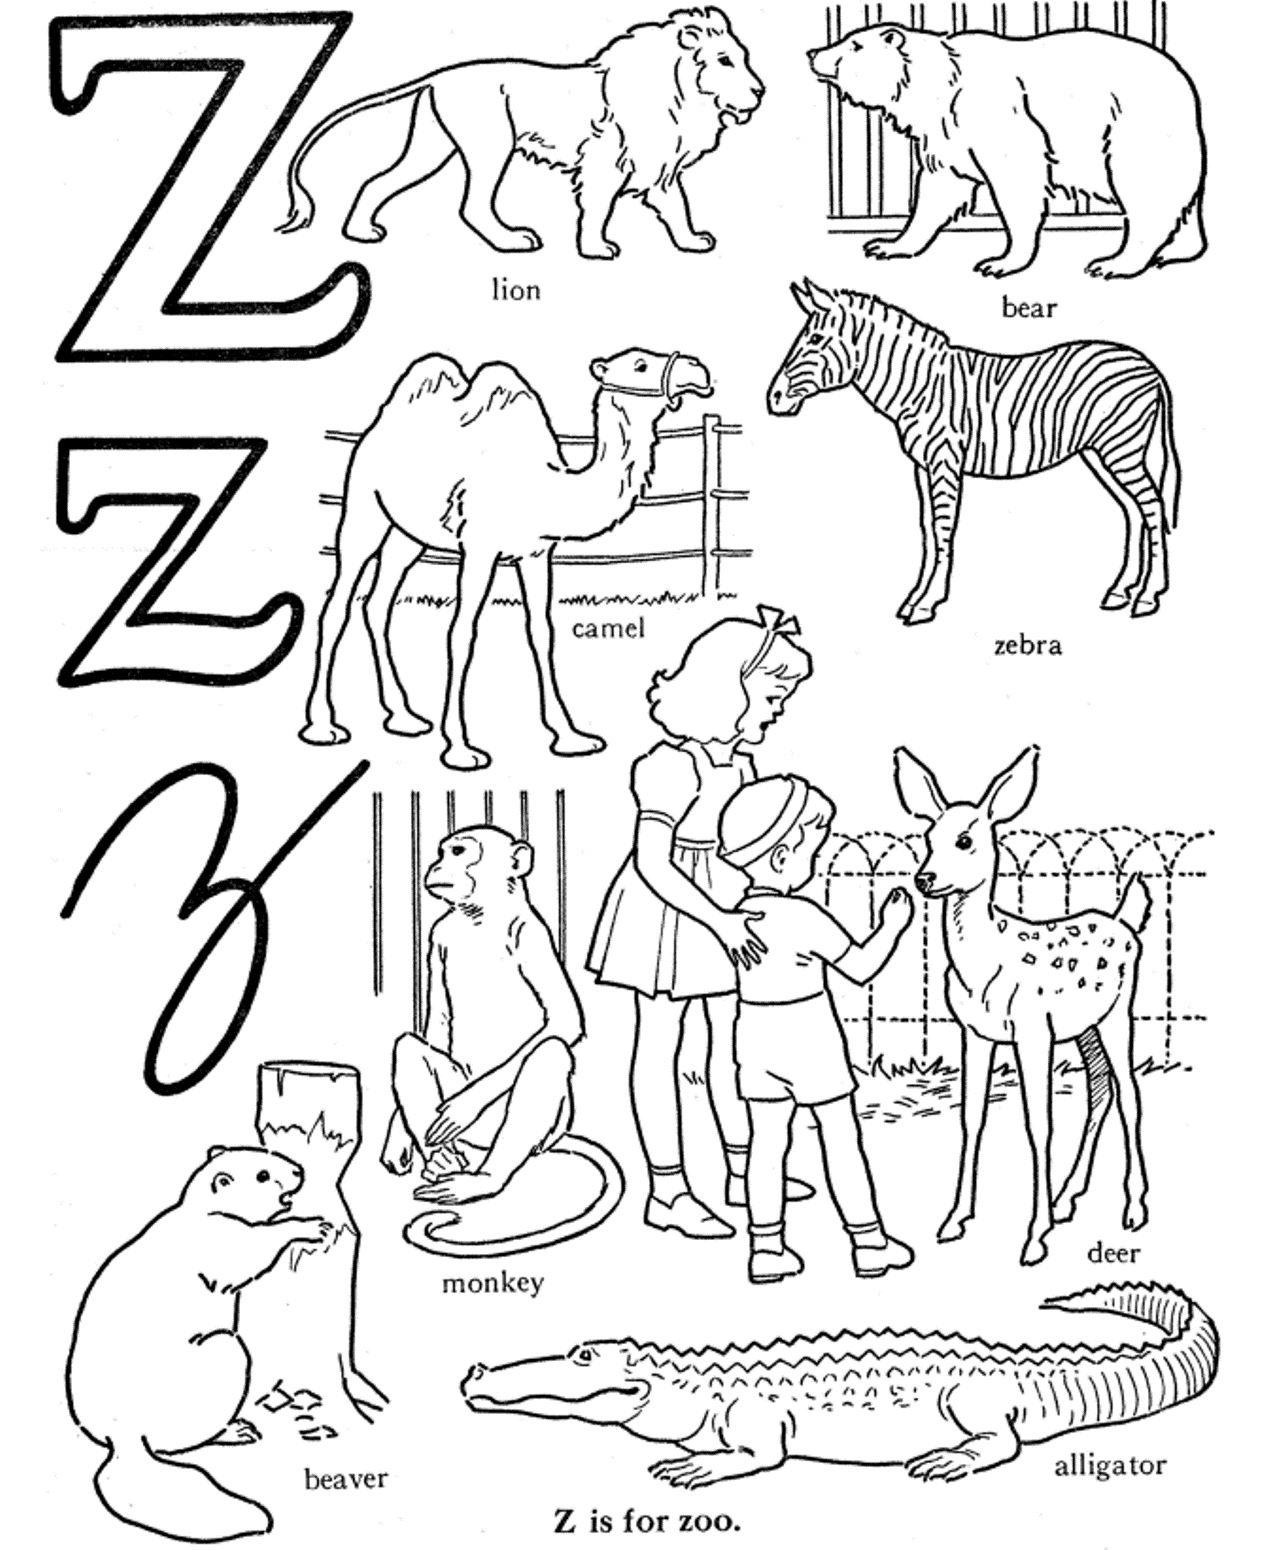 zoo coloring pages z is for zoo Coloring4free